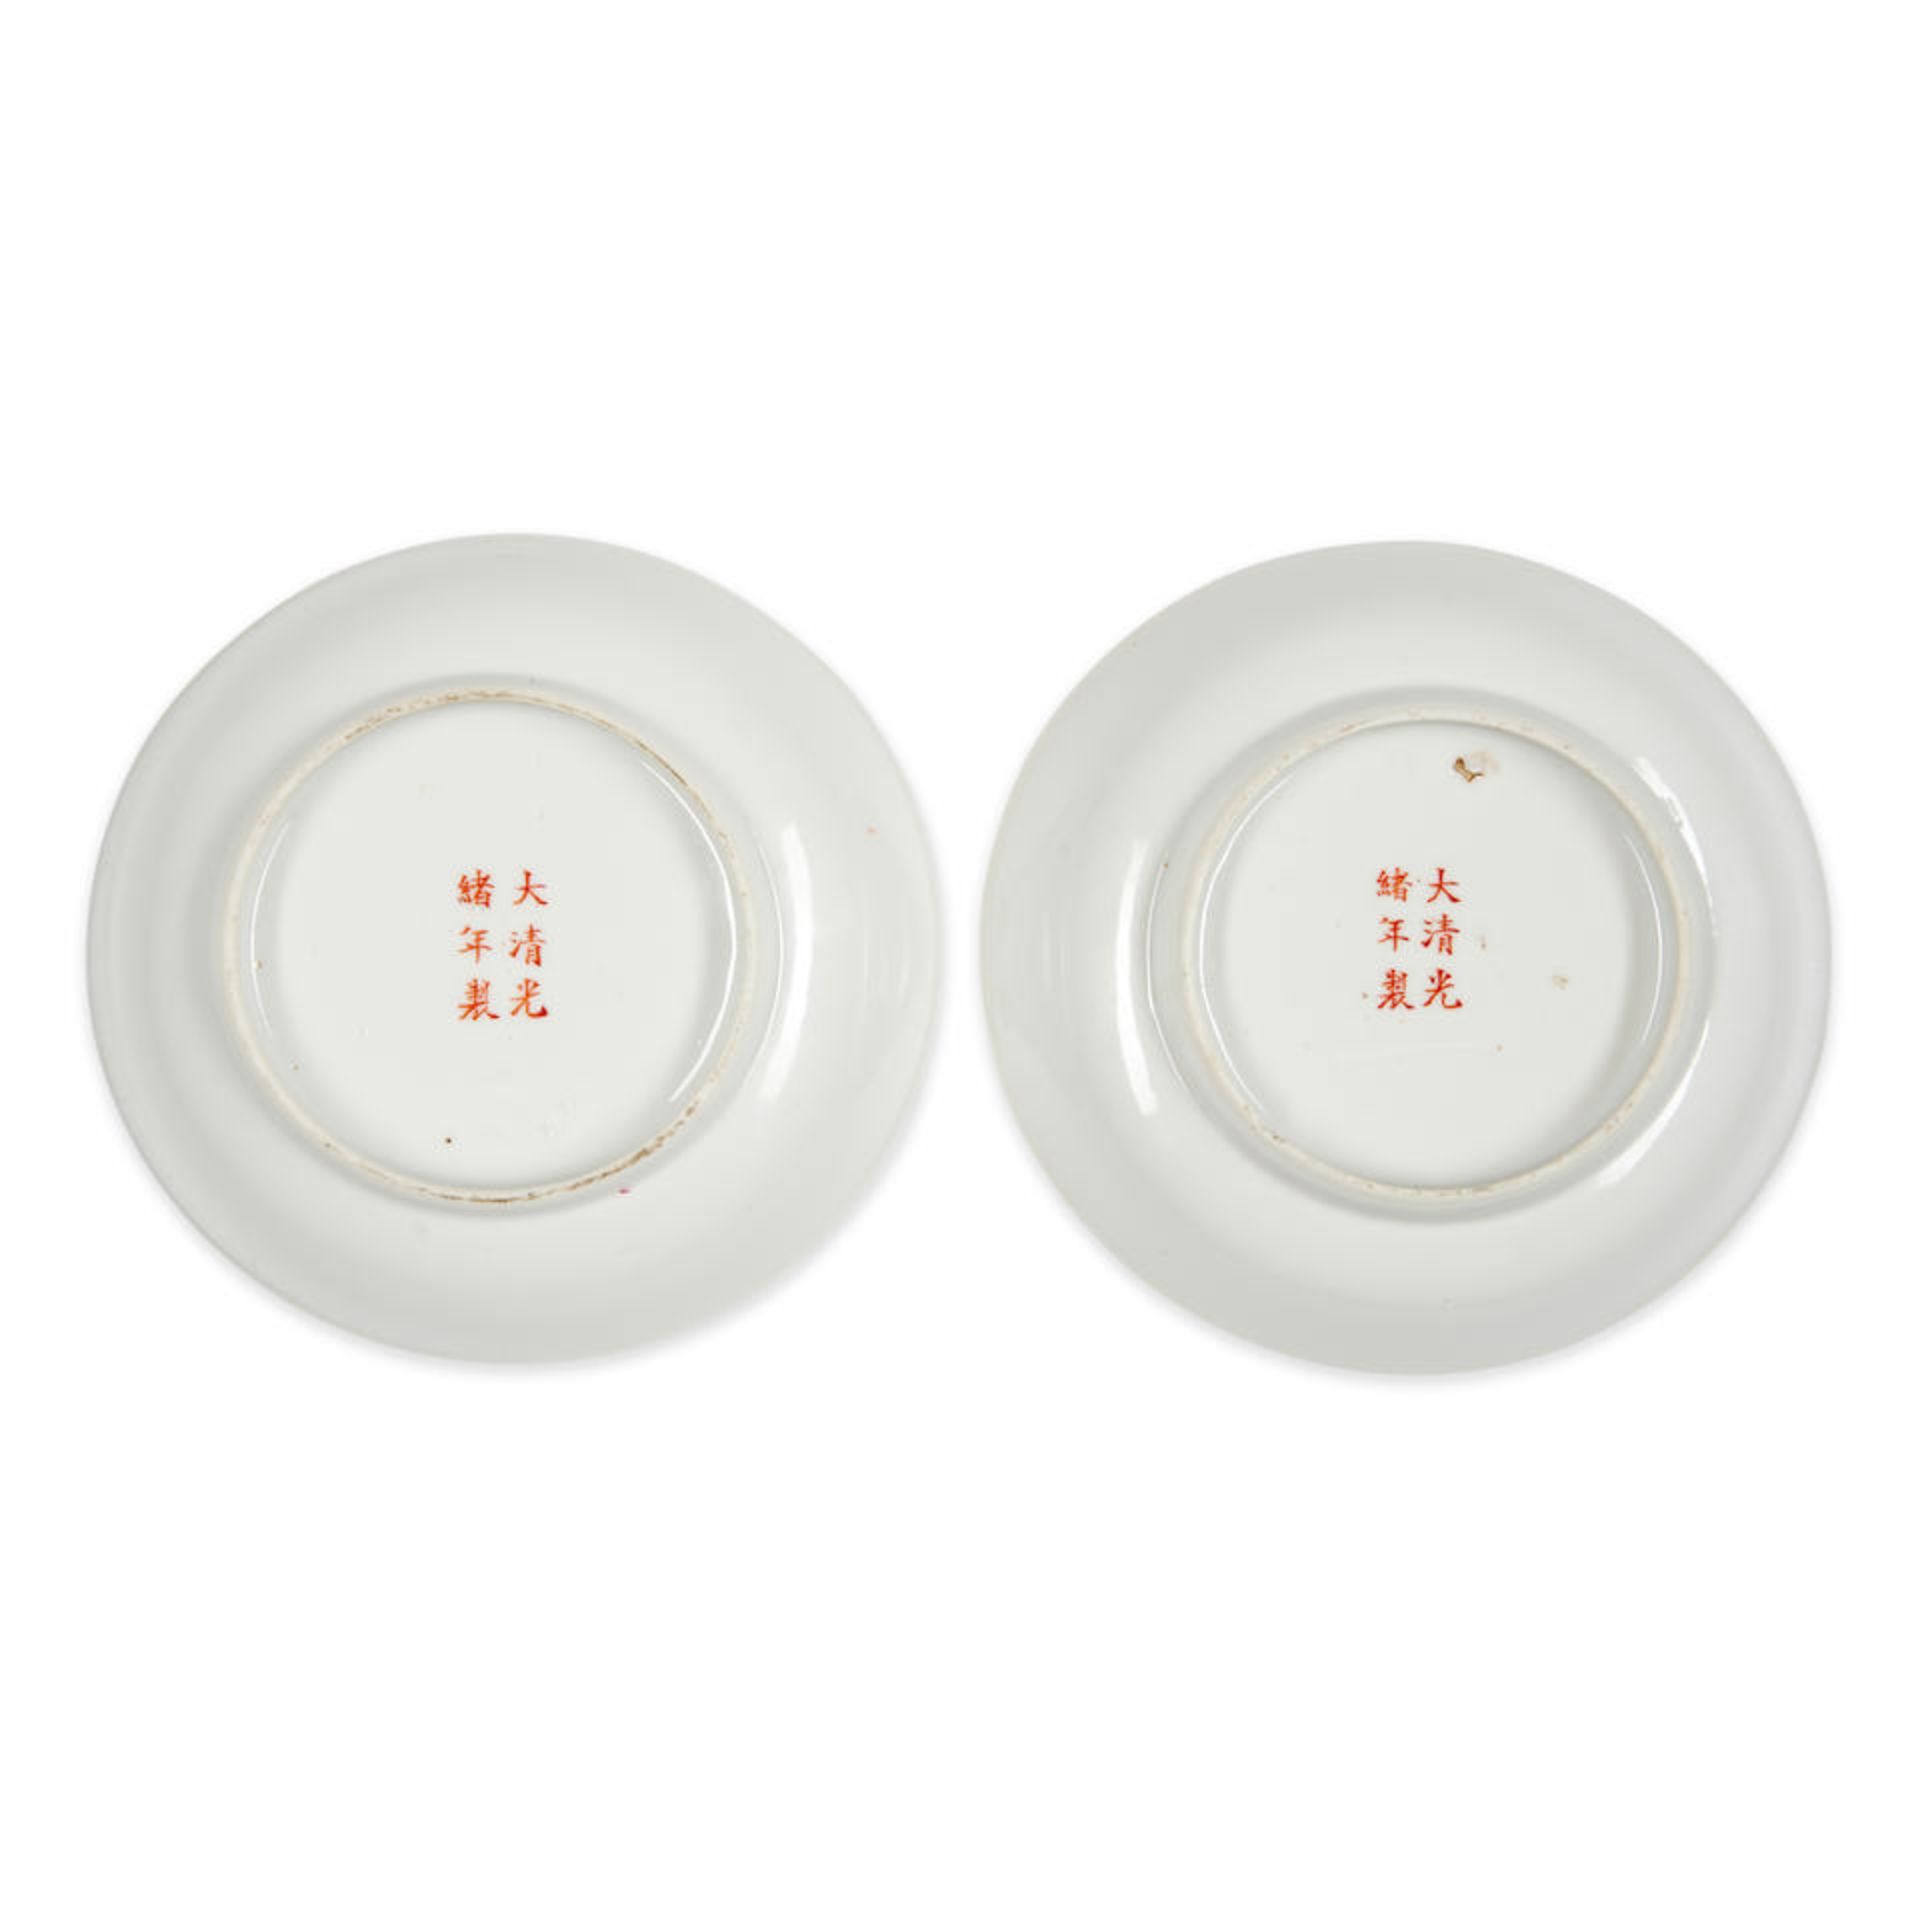 A PAIR OF FAMILLE ROSE 'FLOWER' DISHES - Image 3 of 3